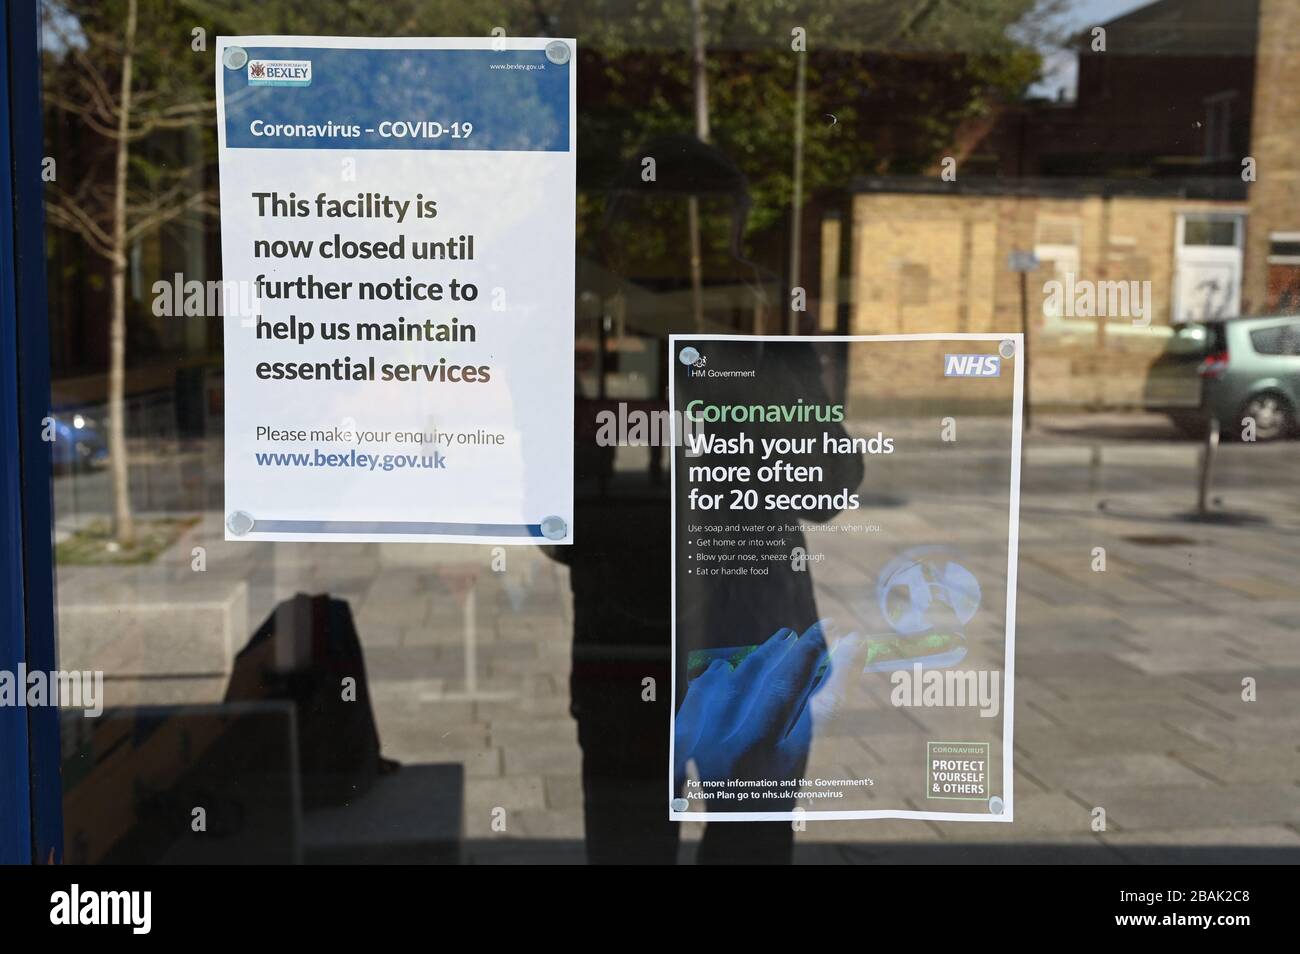 Library Closure. Public Services in Bexley face closure due to the Coronavirus Pandemic. Sidcup, Kent. UK Stock Photo